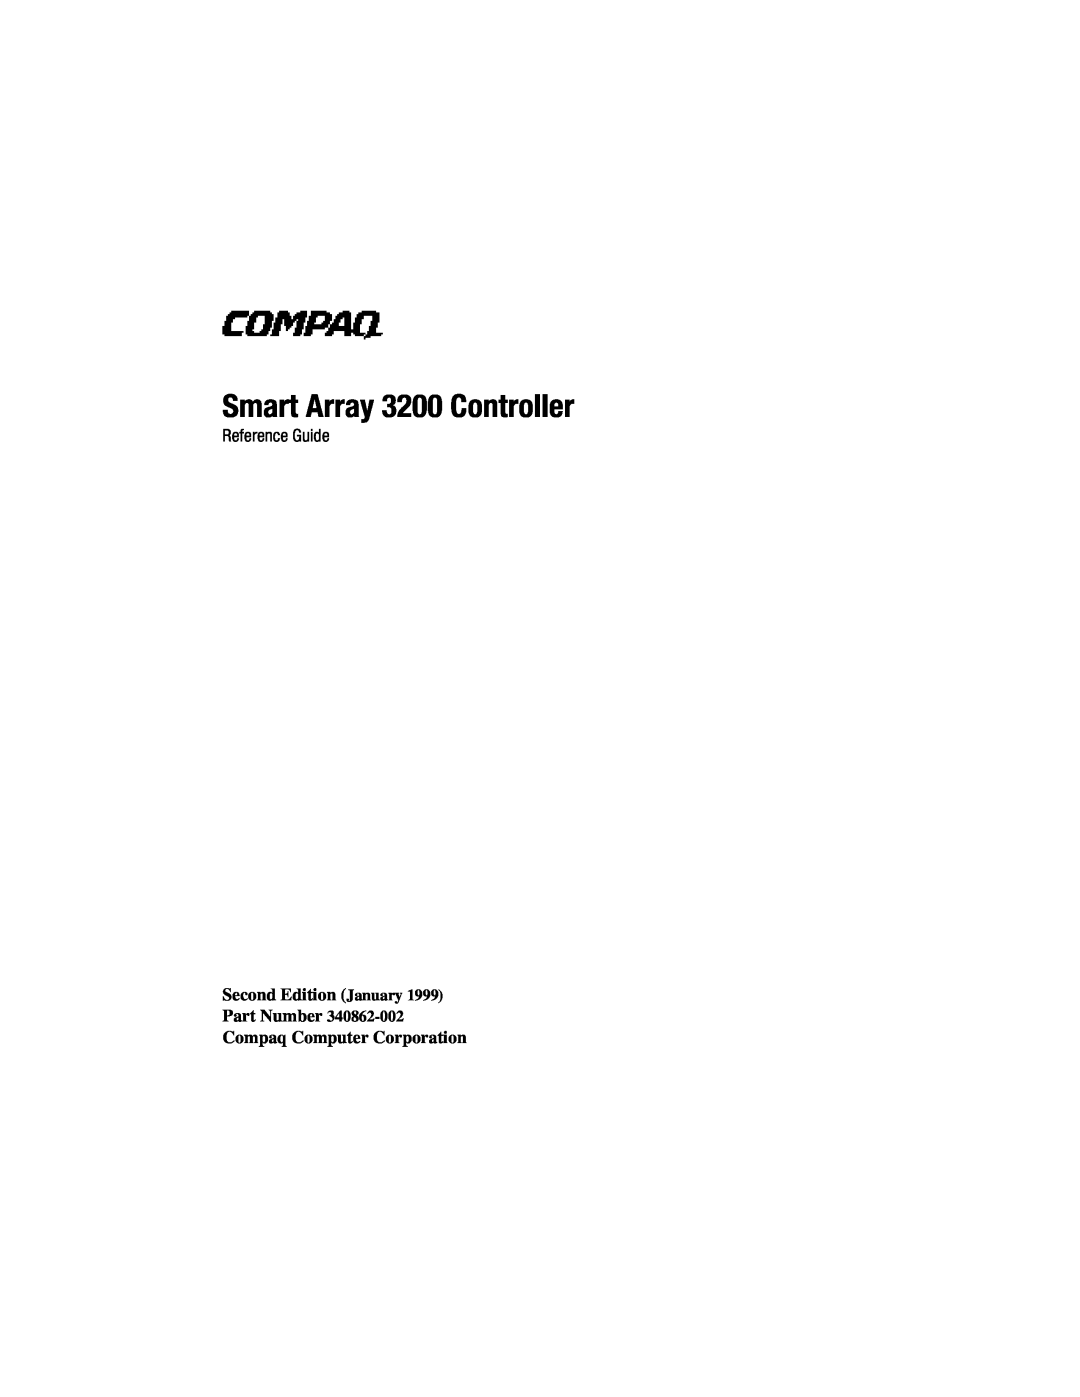 Compaq manual Smart Array 3200 Controller, Reference Guide 